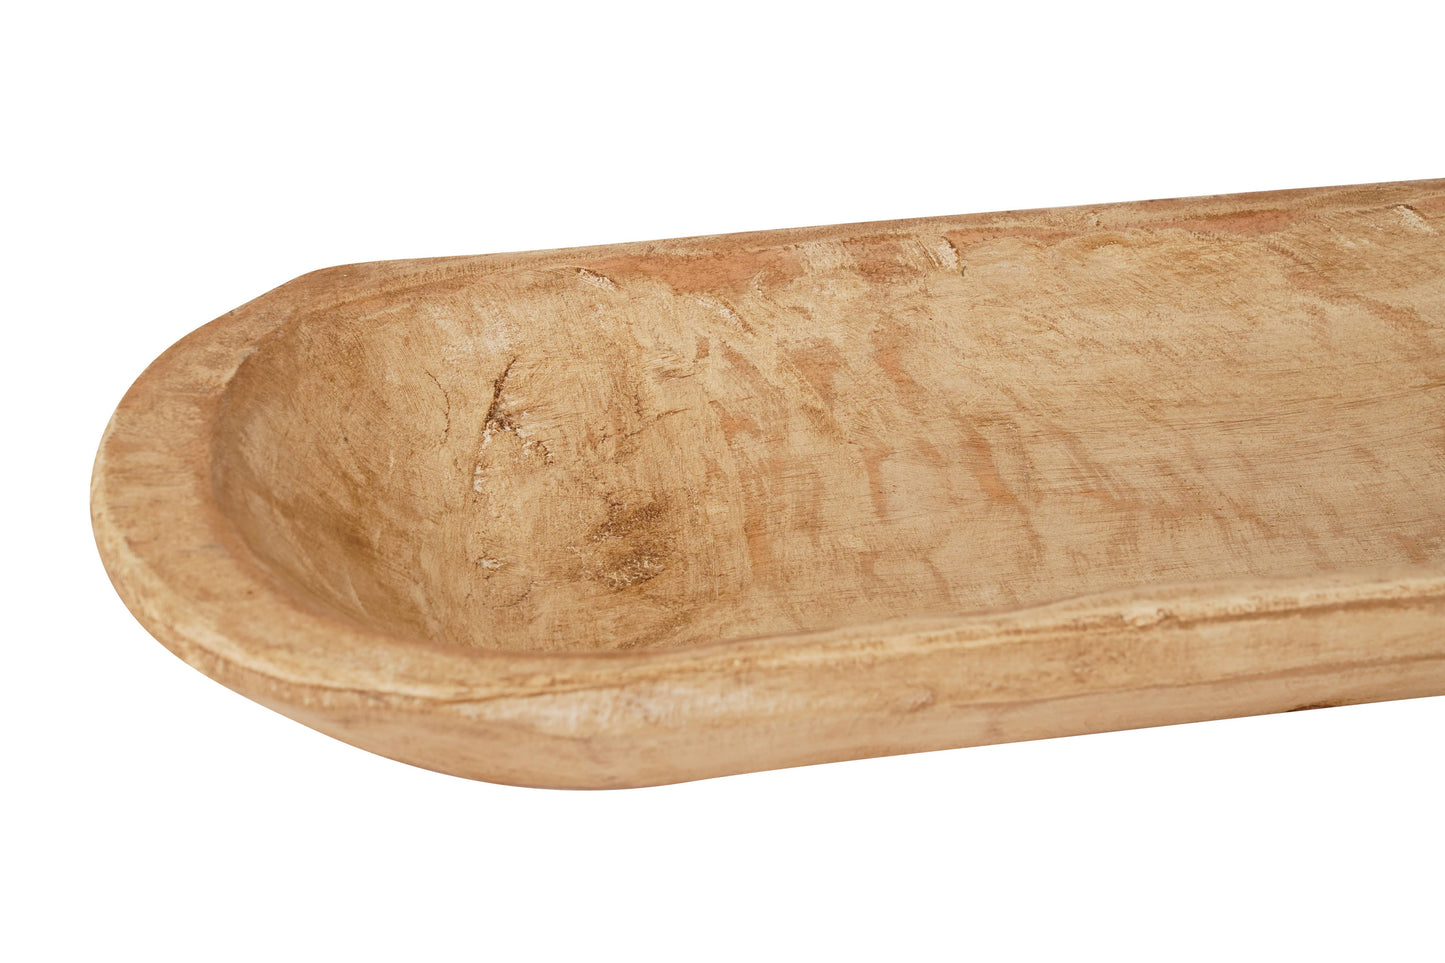 Baguette-Small Bread Bowl-Home Decor #2-Wooden-6x20 inches: White